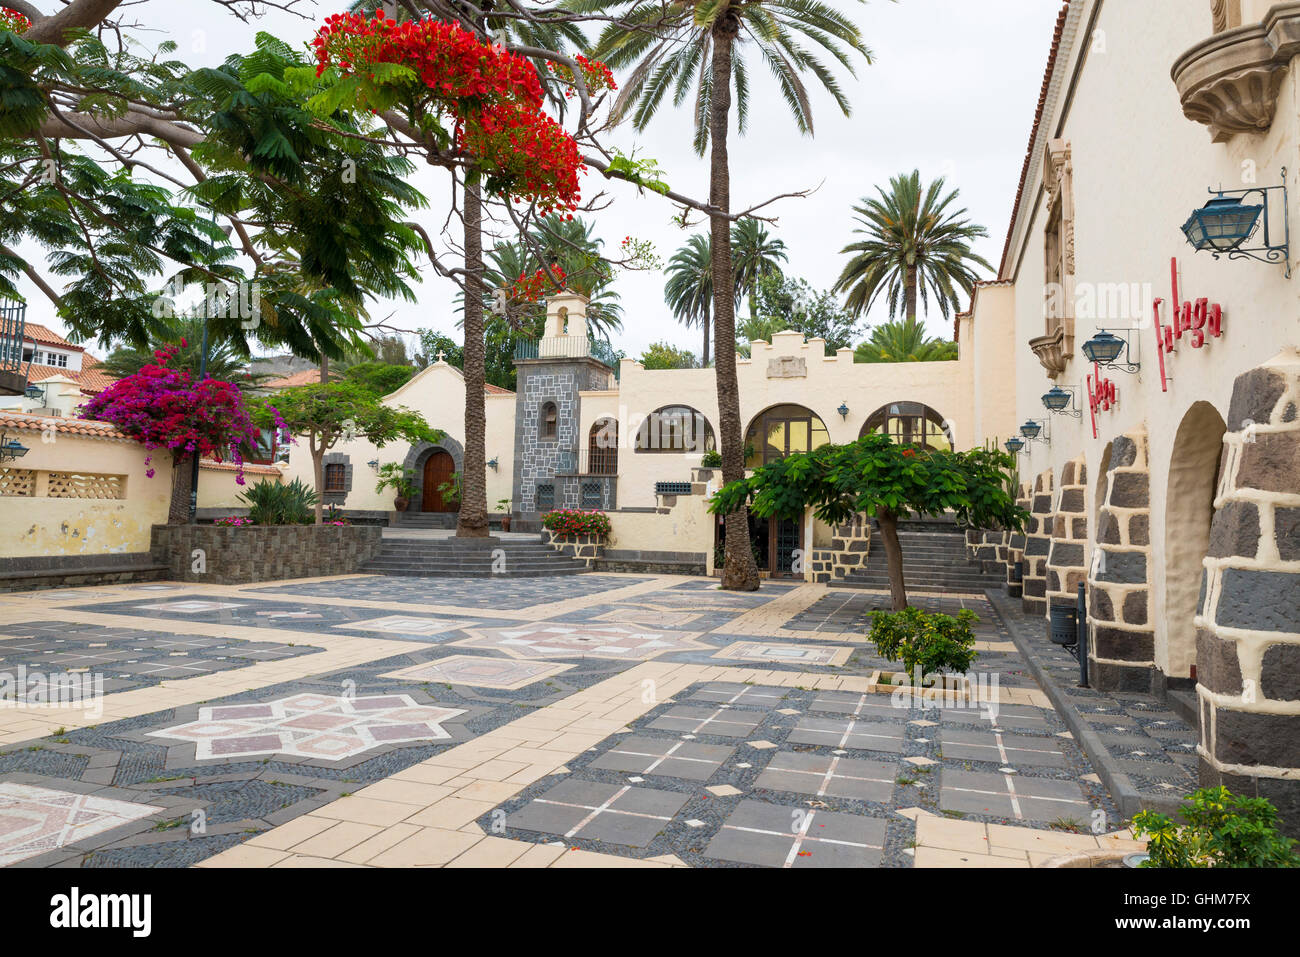 Pueblo Canario is an architectural complex located in the Garden City  district of the city of Las Palmas (Canary Islands, Spain Stock Photo -  Alamy